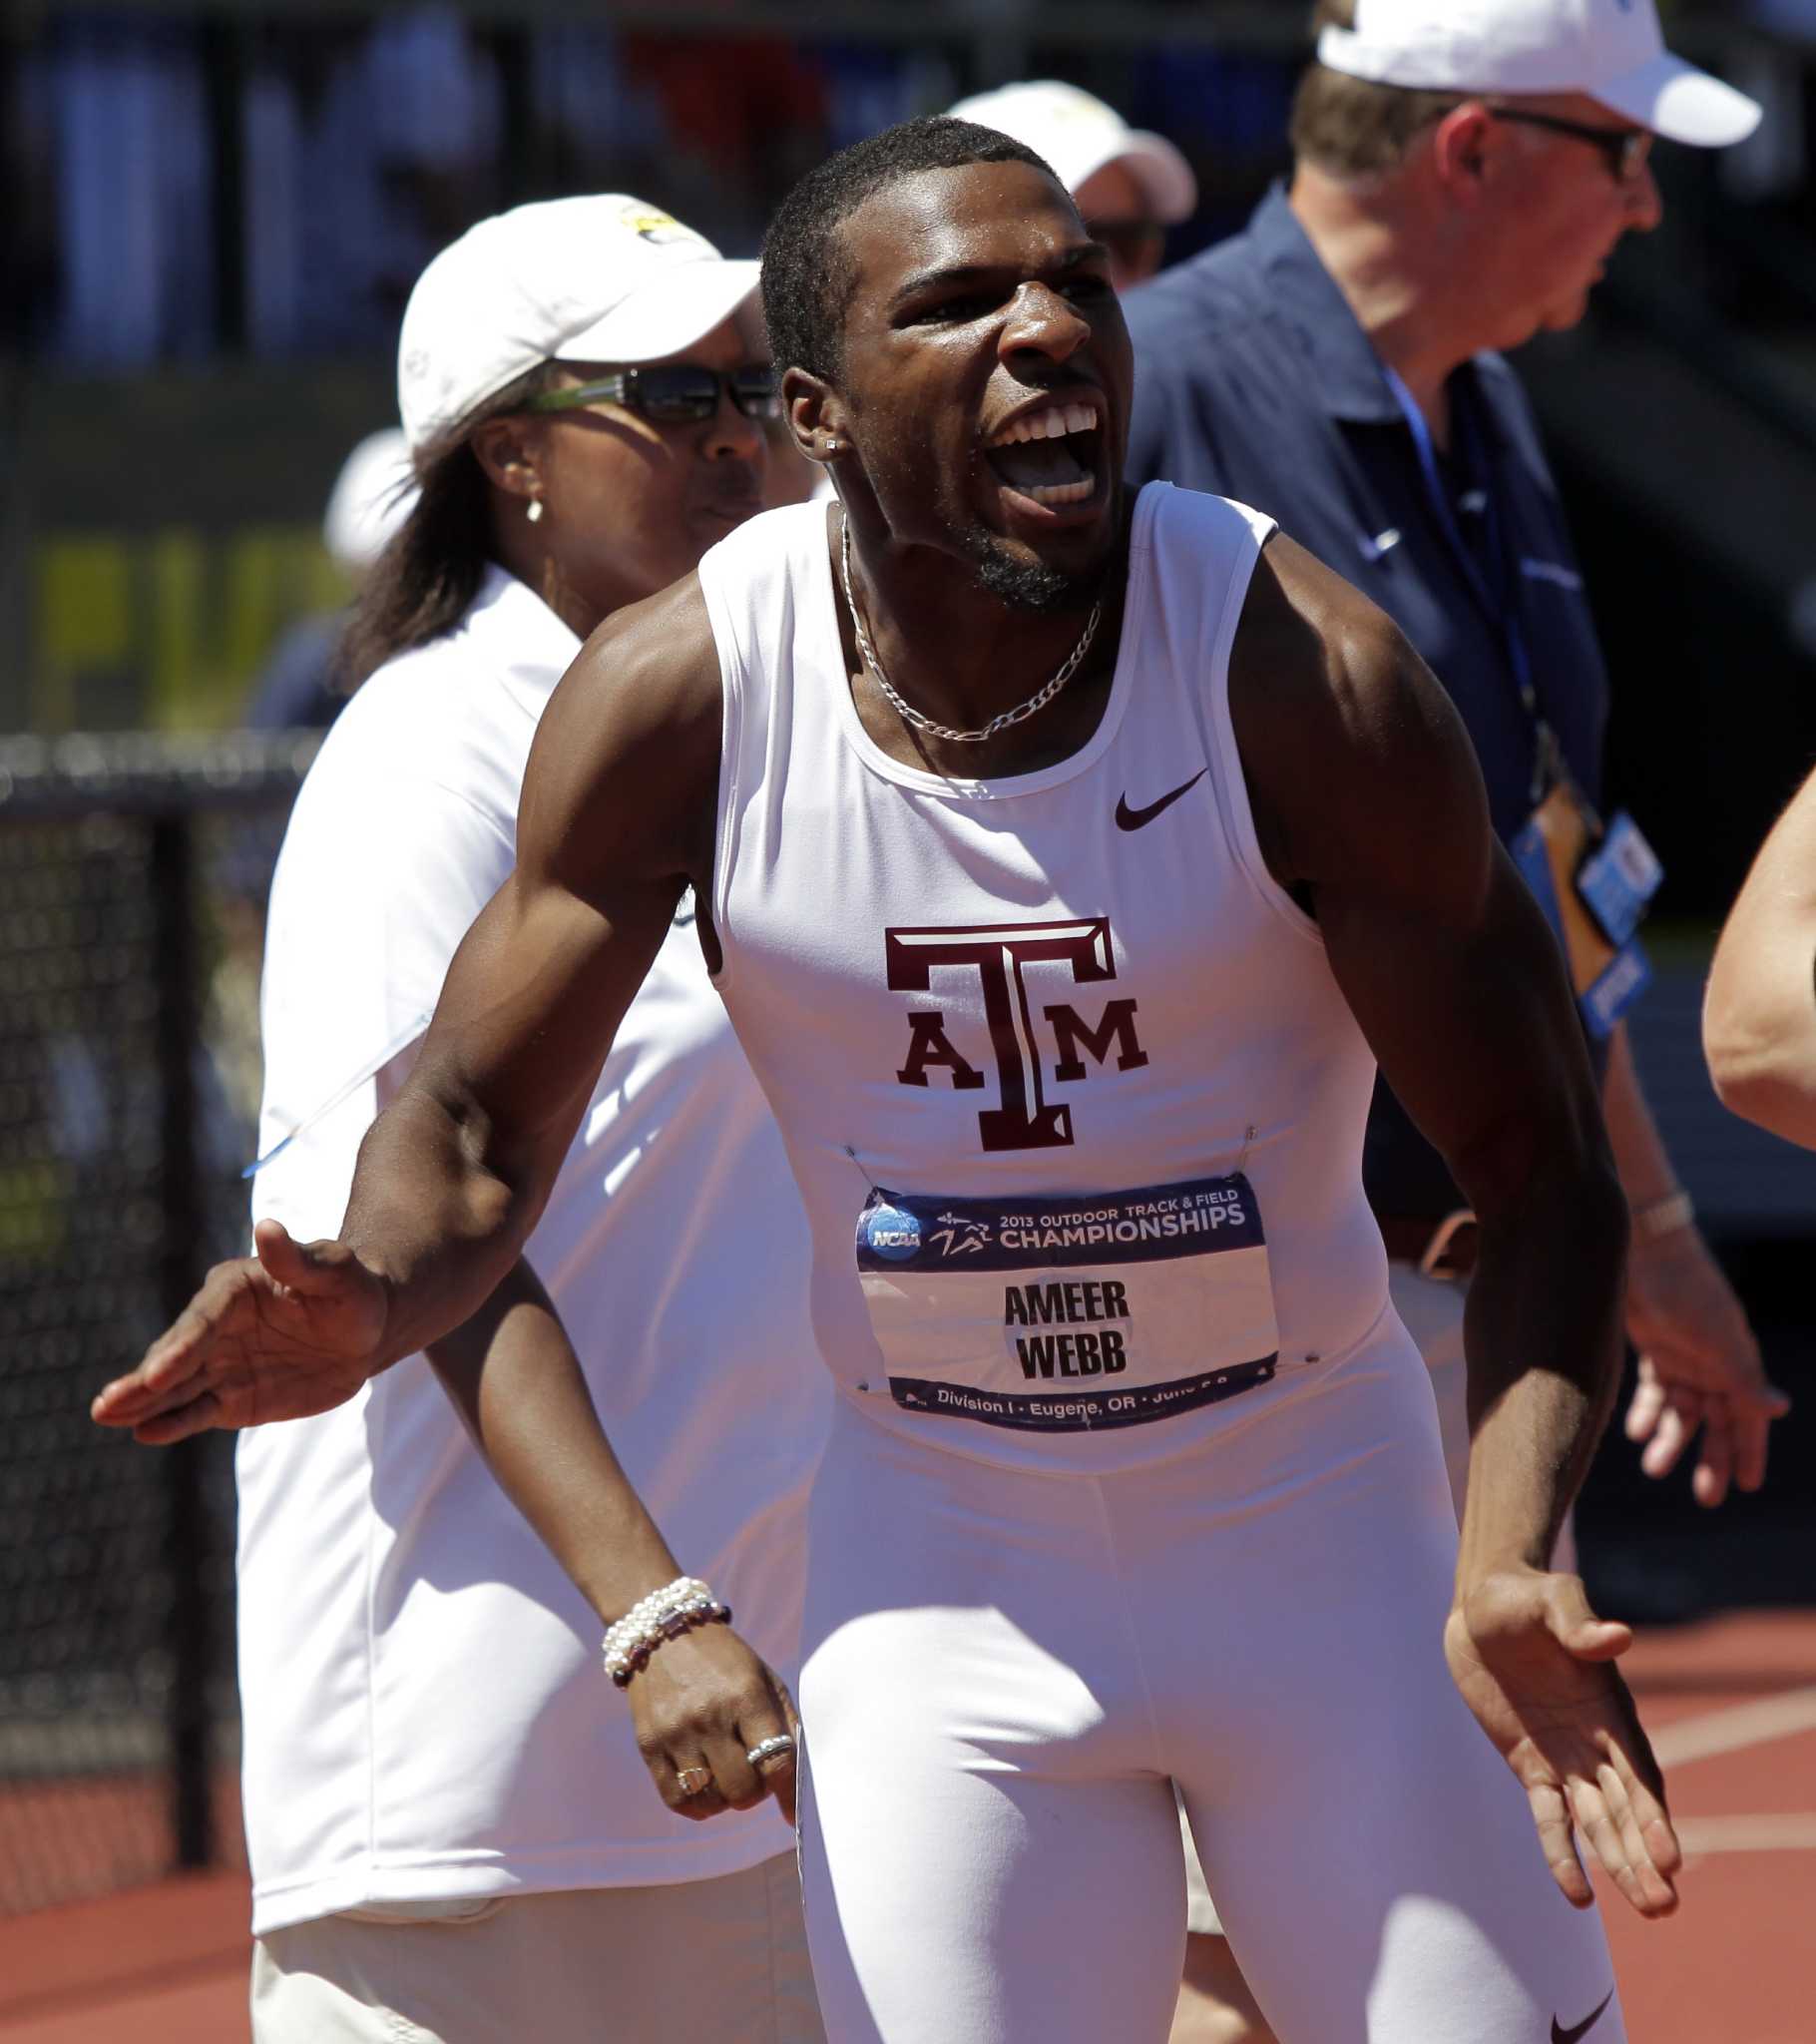 Texas A&M ties Florida for NCAA men's track title